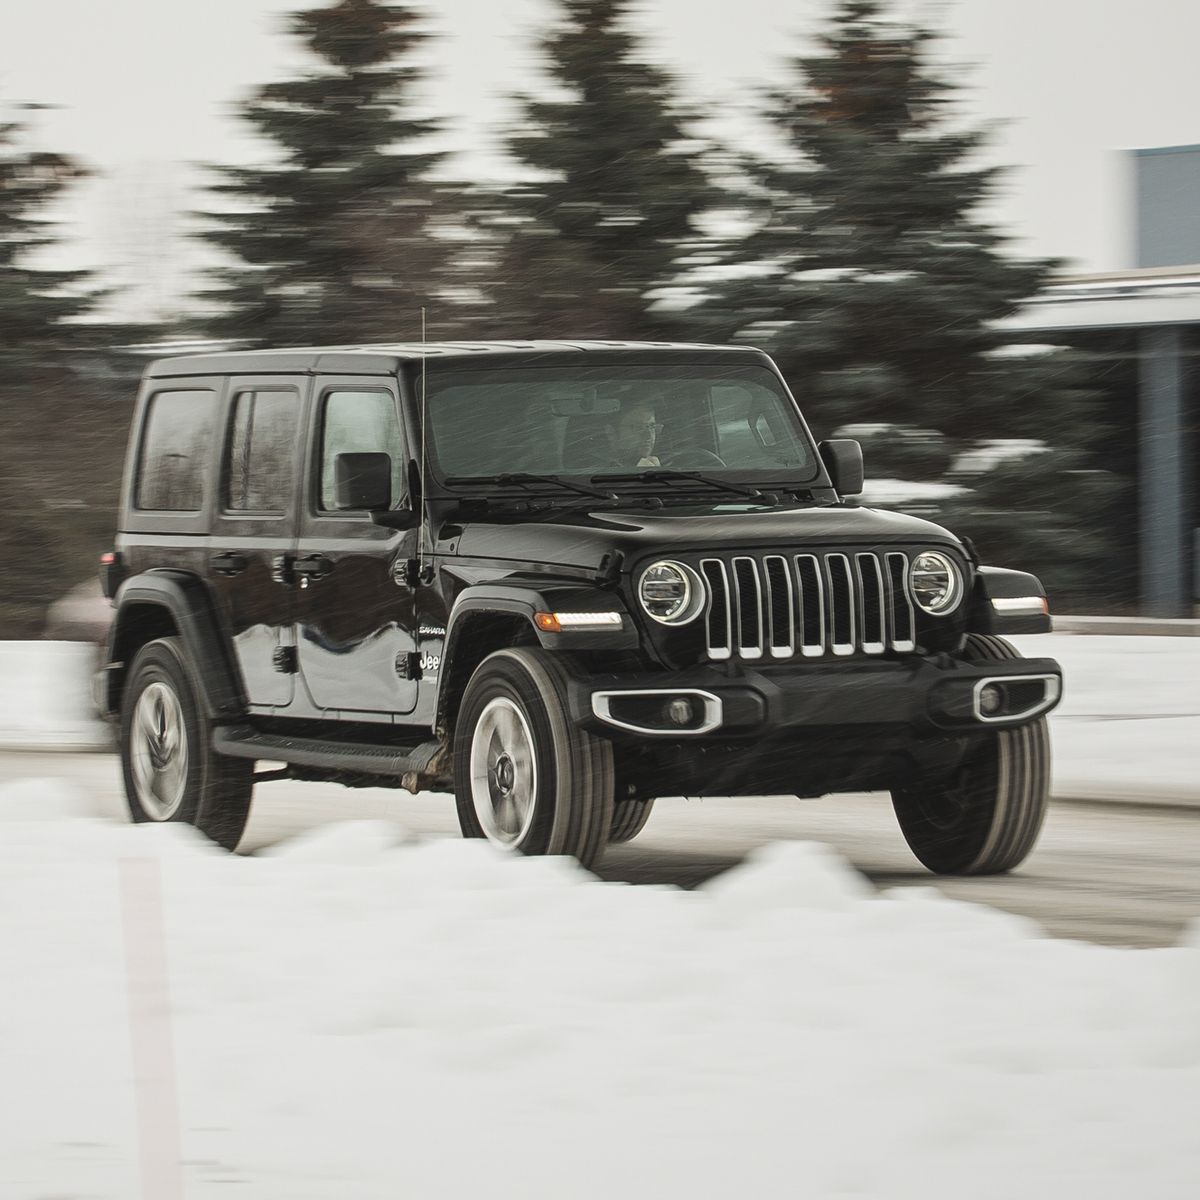 Tested: 2018 Jeep Wrangler Unlimited V-6 AWD Auto